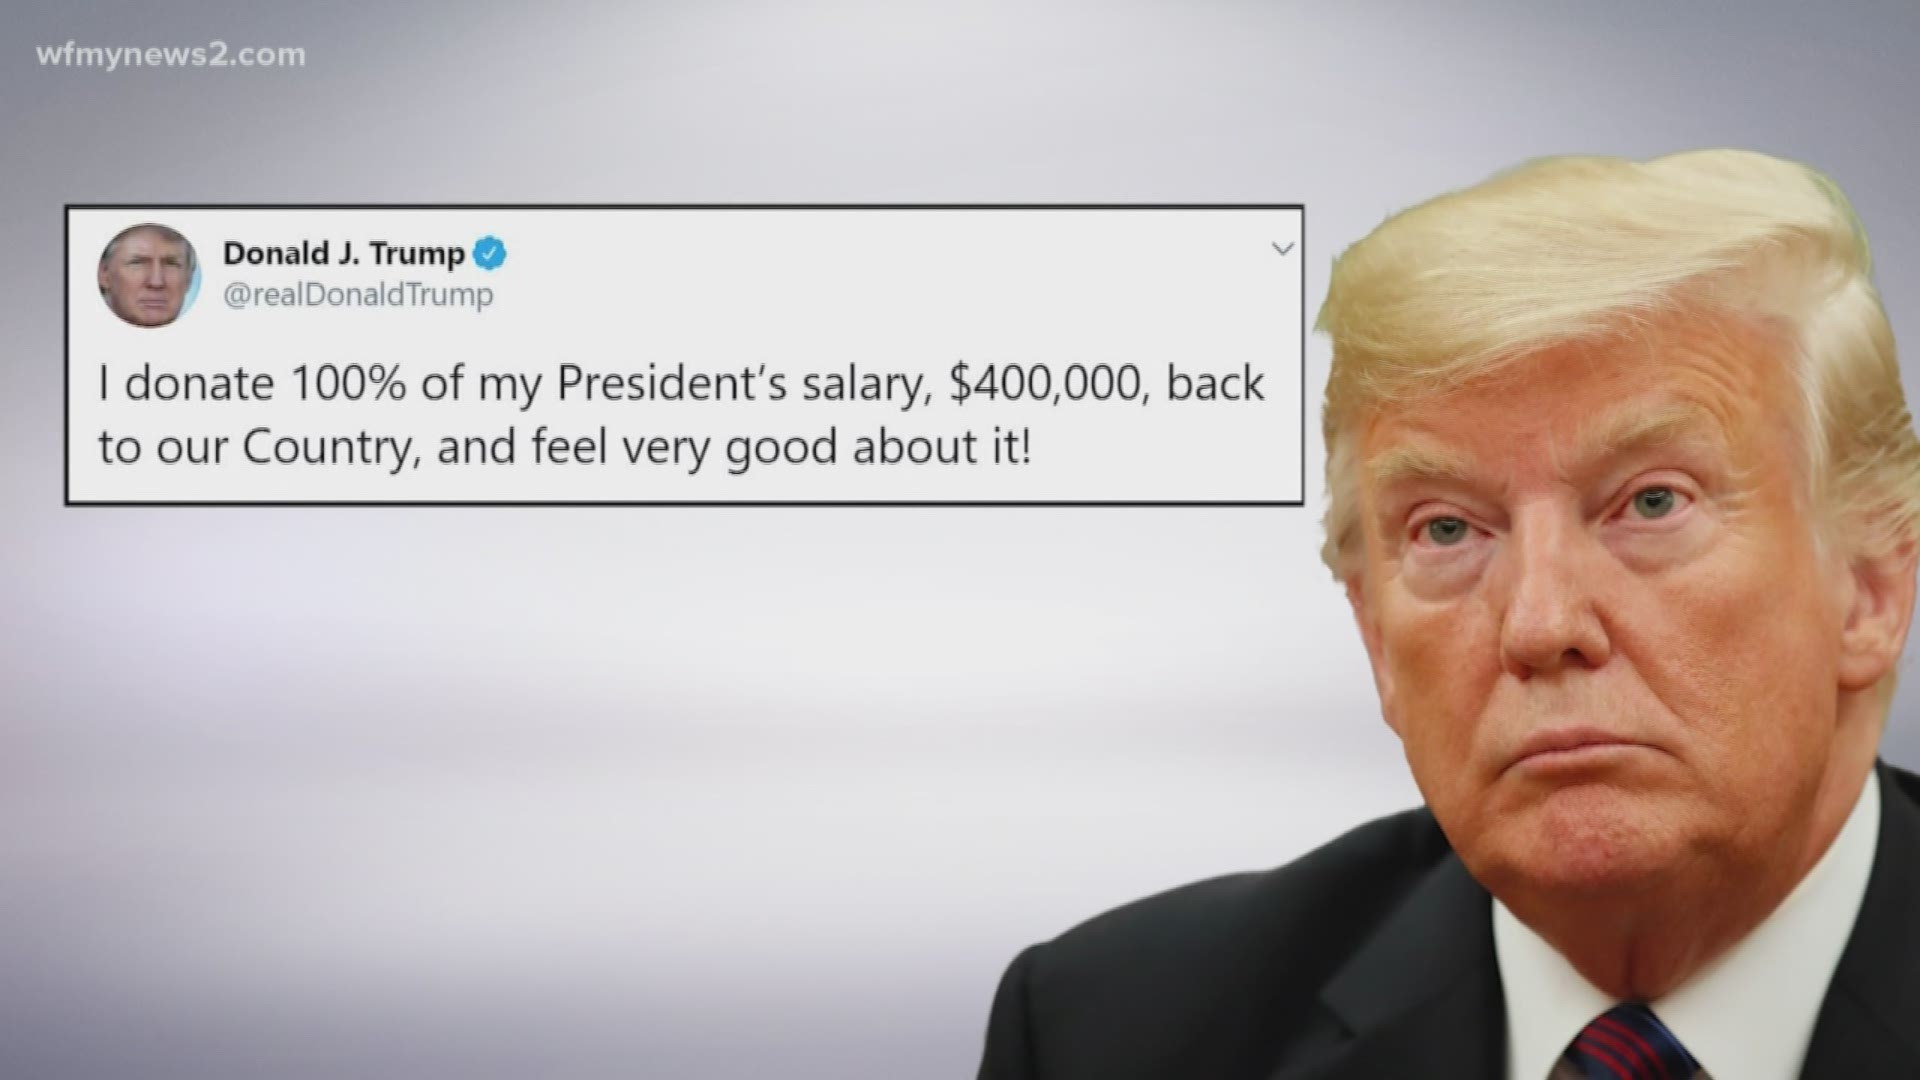 President Trump has donated his president's salary, but it hasn't gone